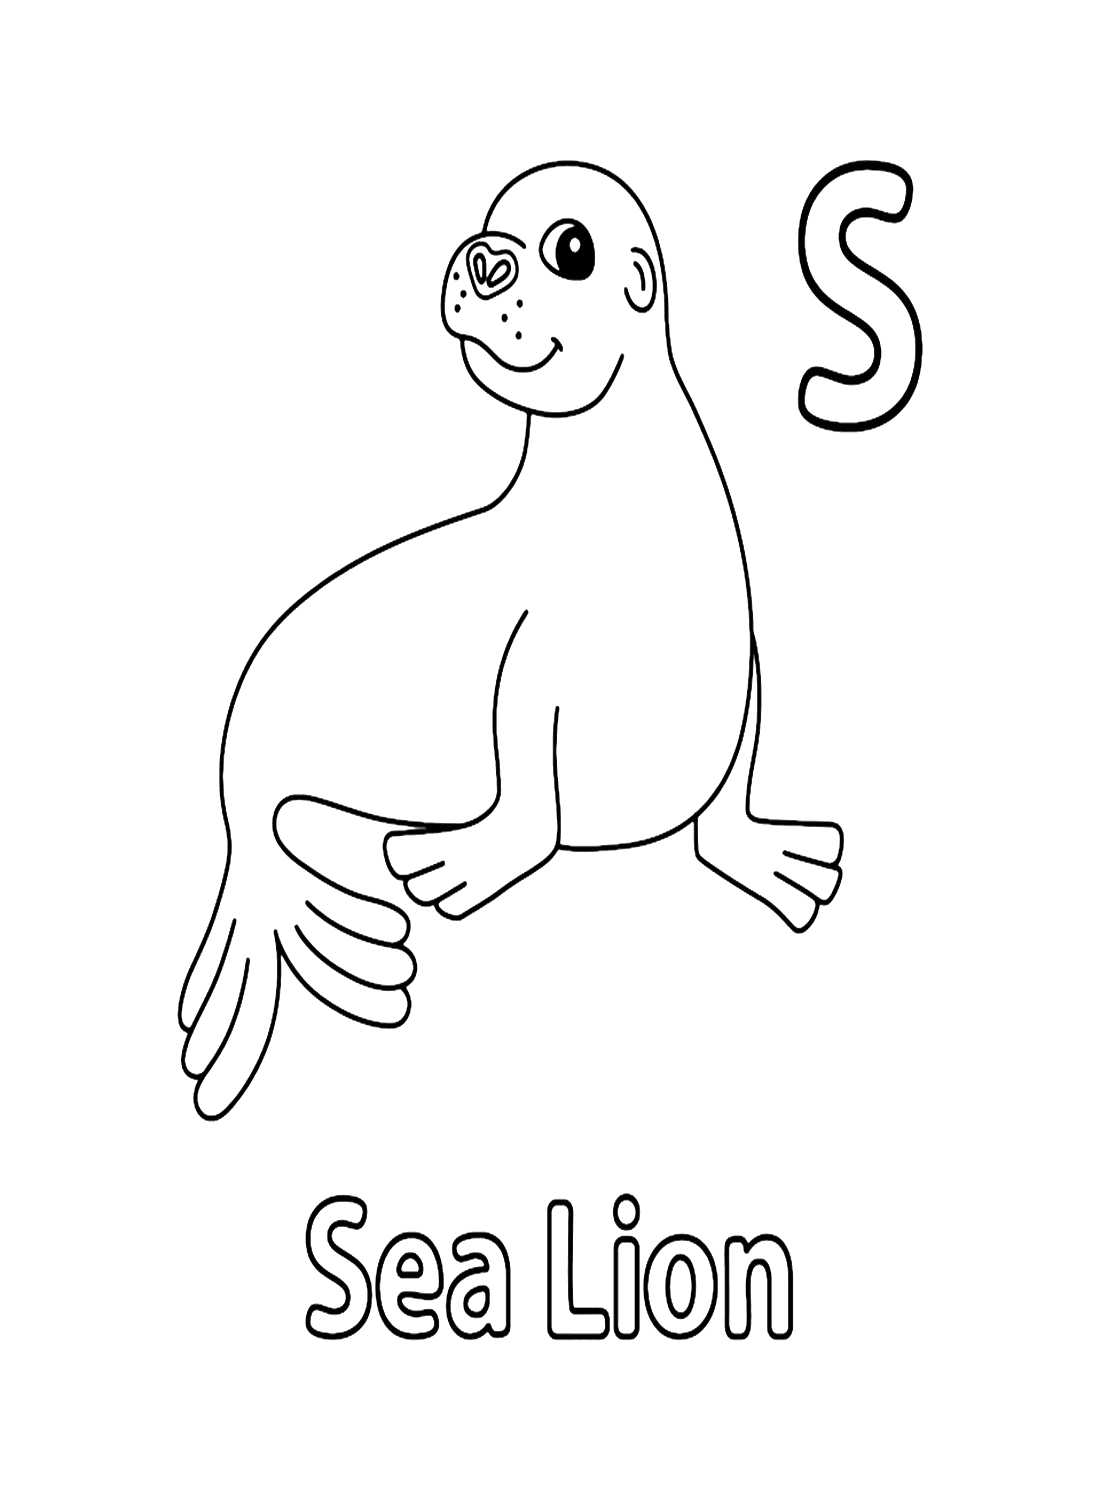 Letter S For Sea Lion from Sea Lion